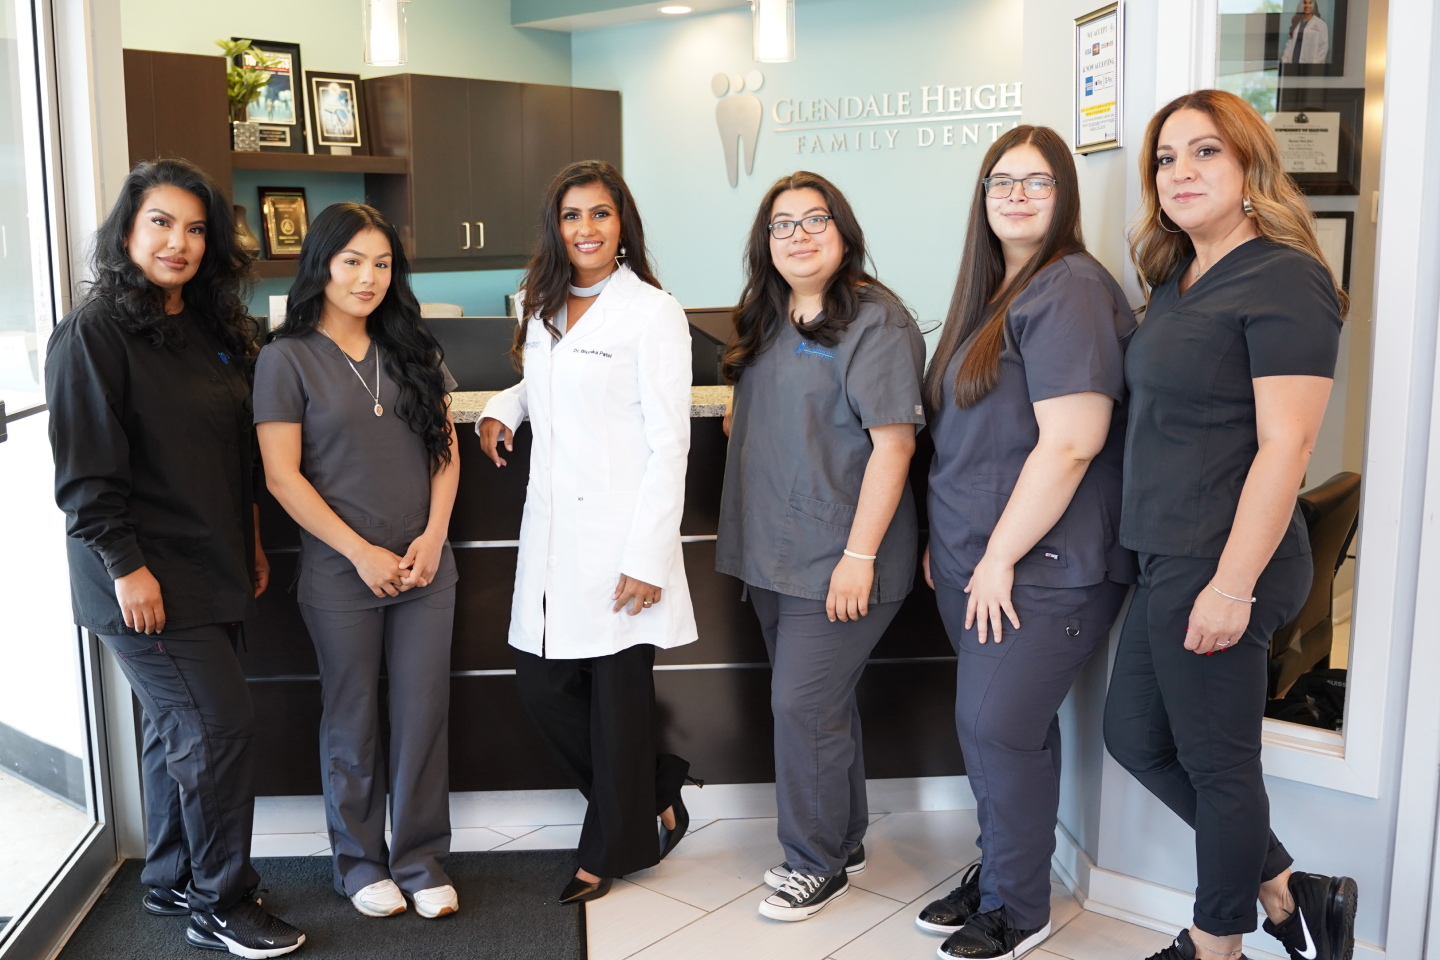 know More About Us at Glendale Heights Family Dental